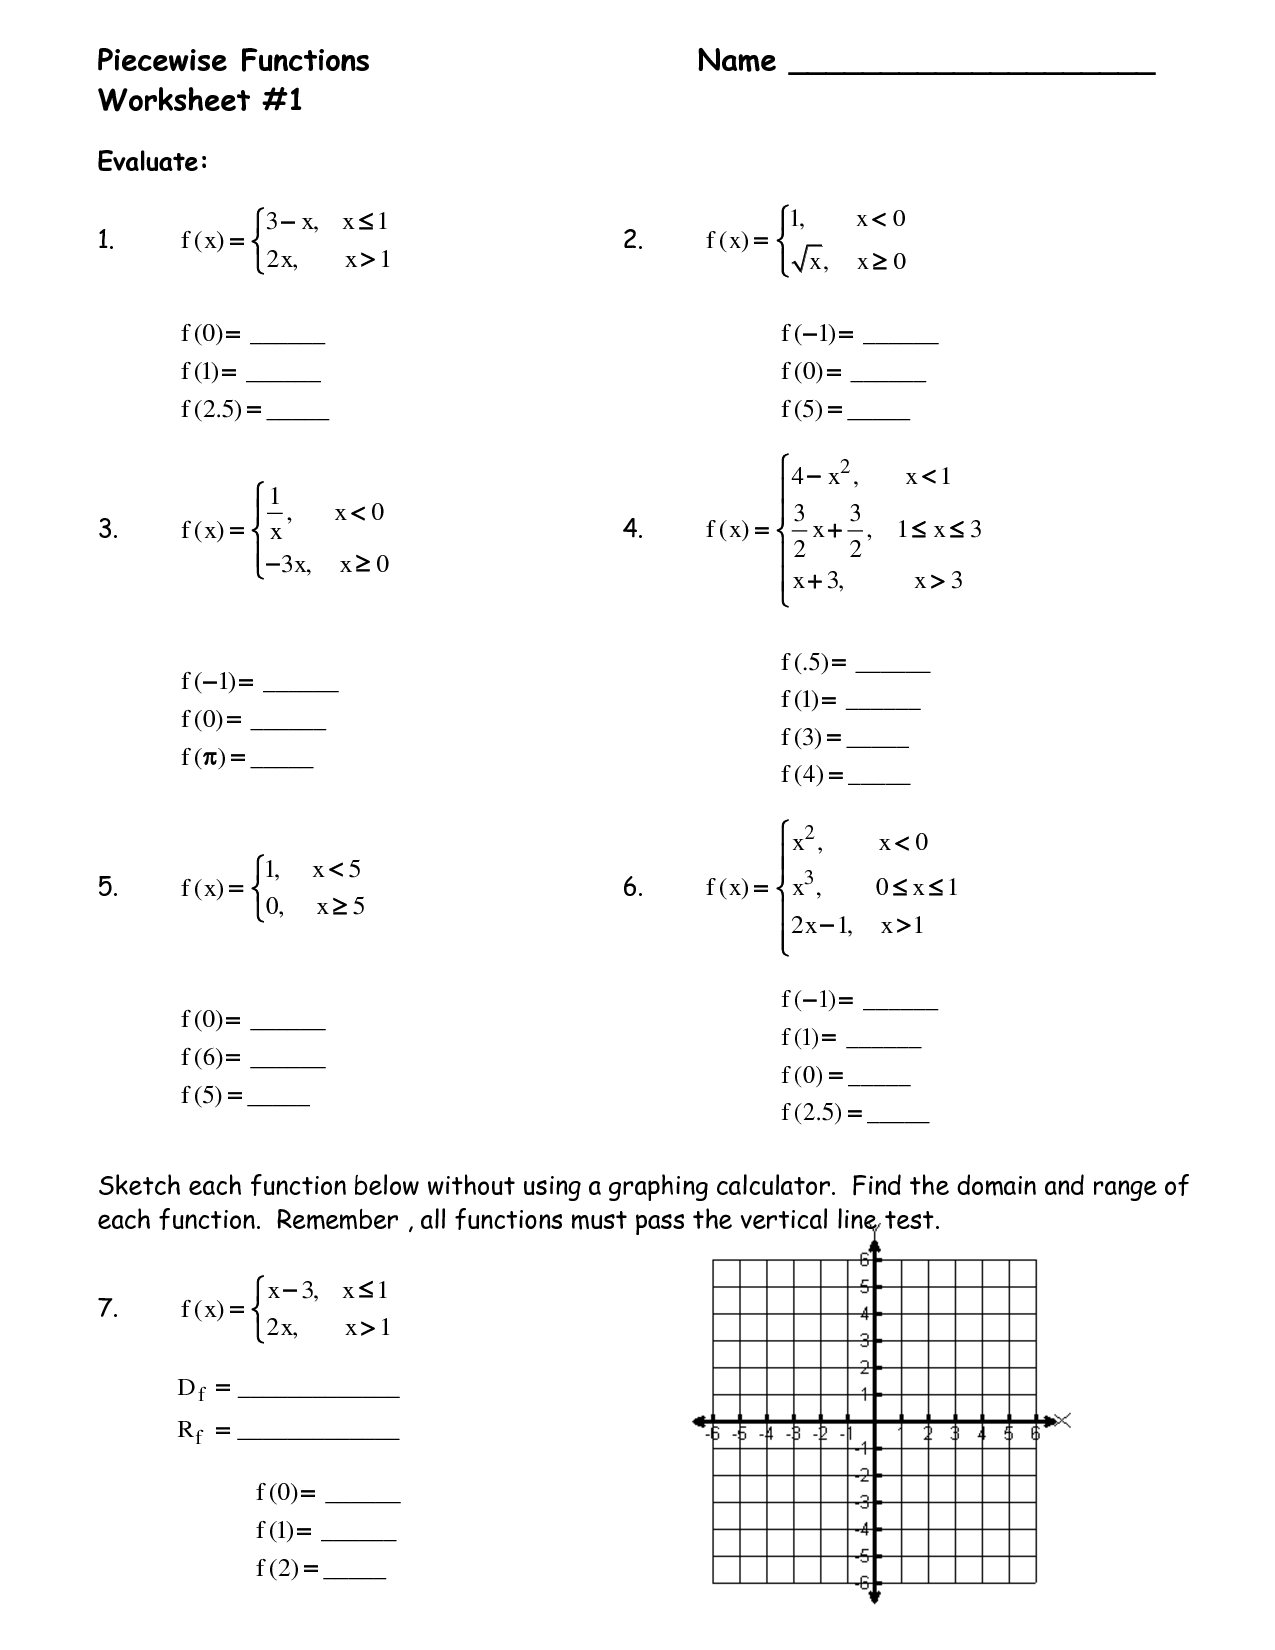 Piecewise Function Worksheet With Answers